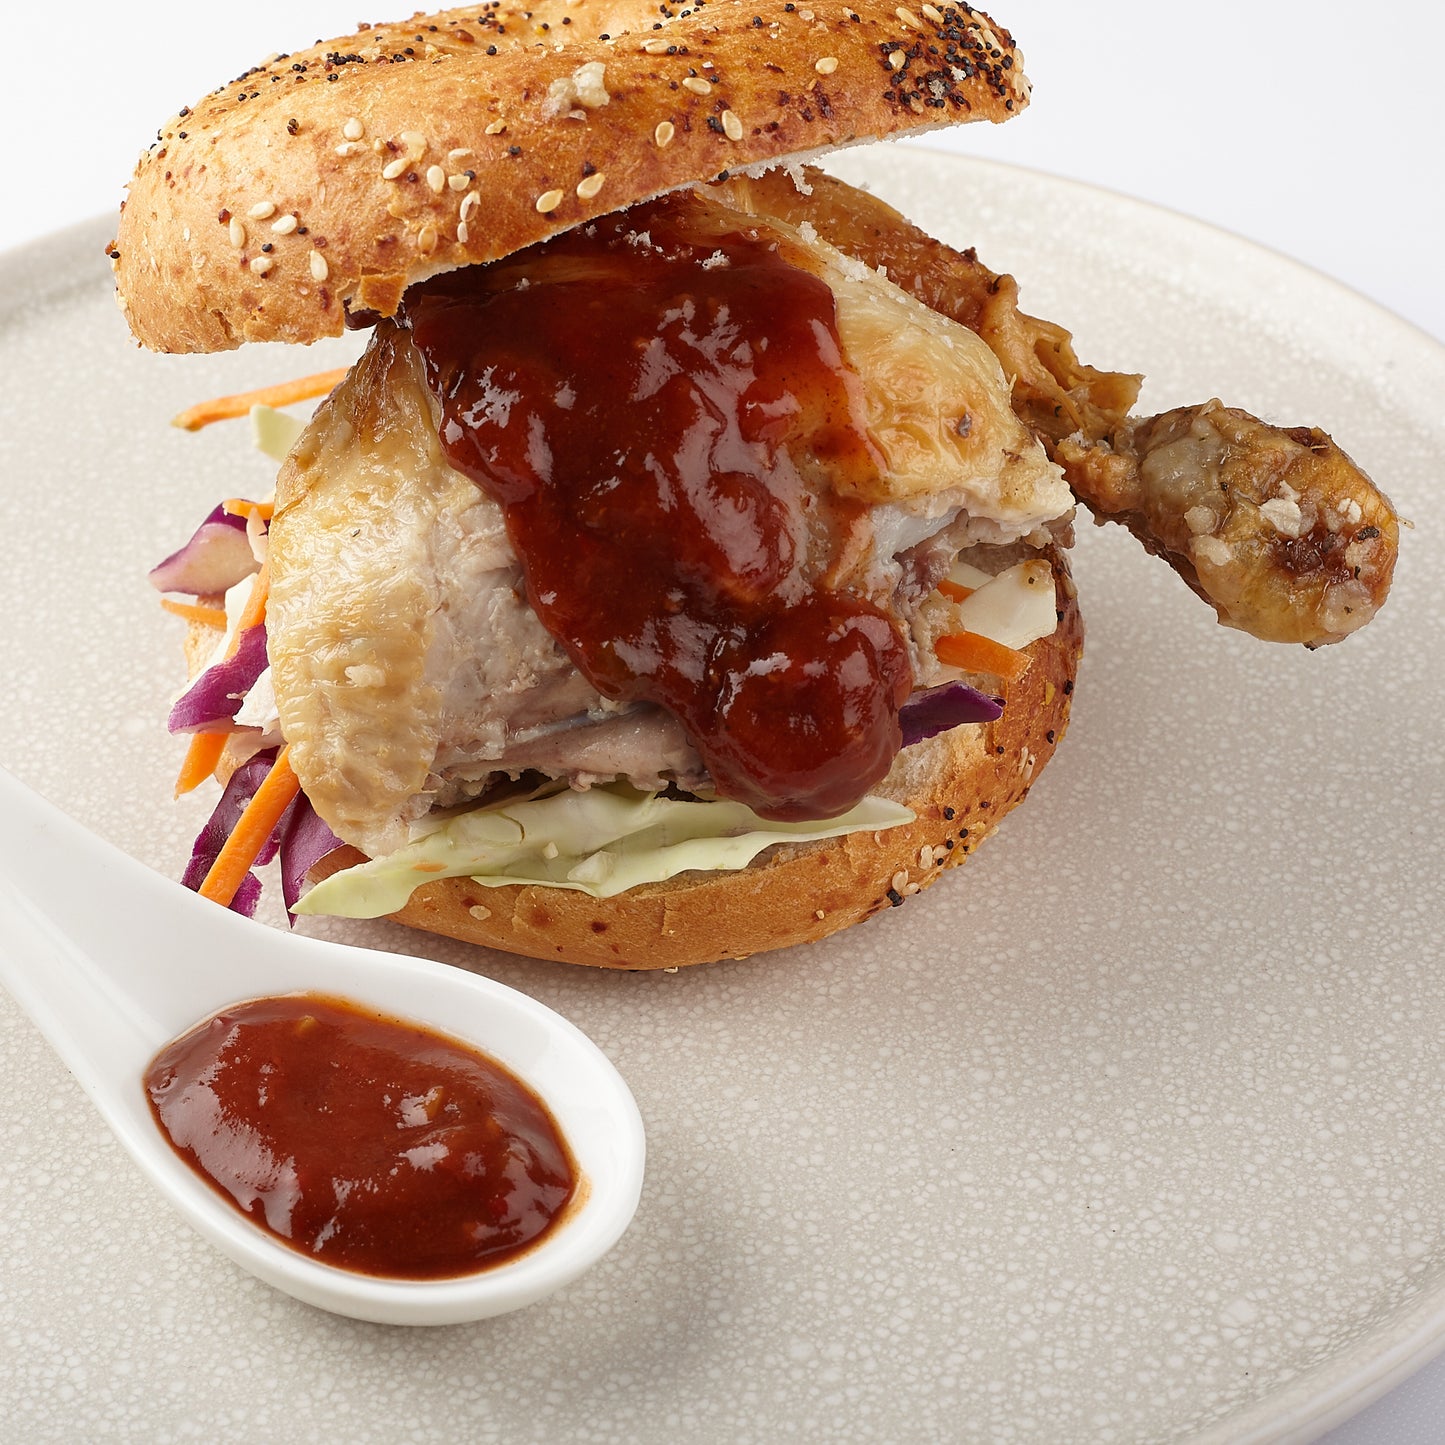 Slow roasted chicken sesame bagle and a generous spoonful of Nan's Tomato Relish. The secret sauce to great tasting bagels.